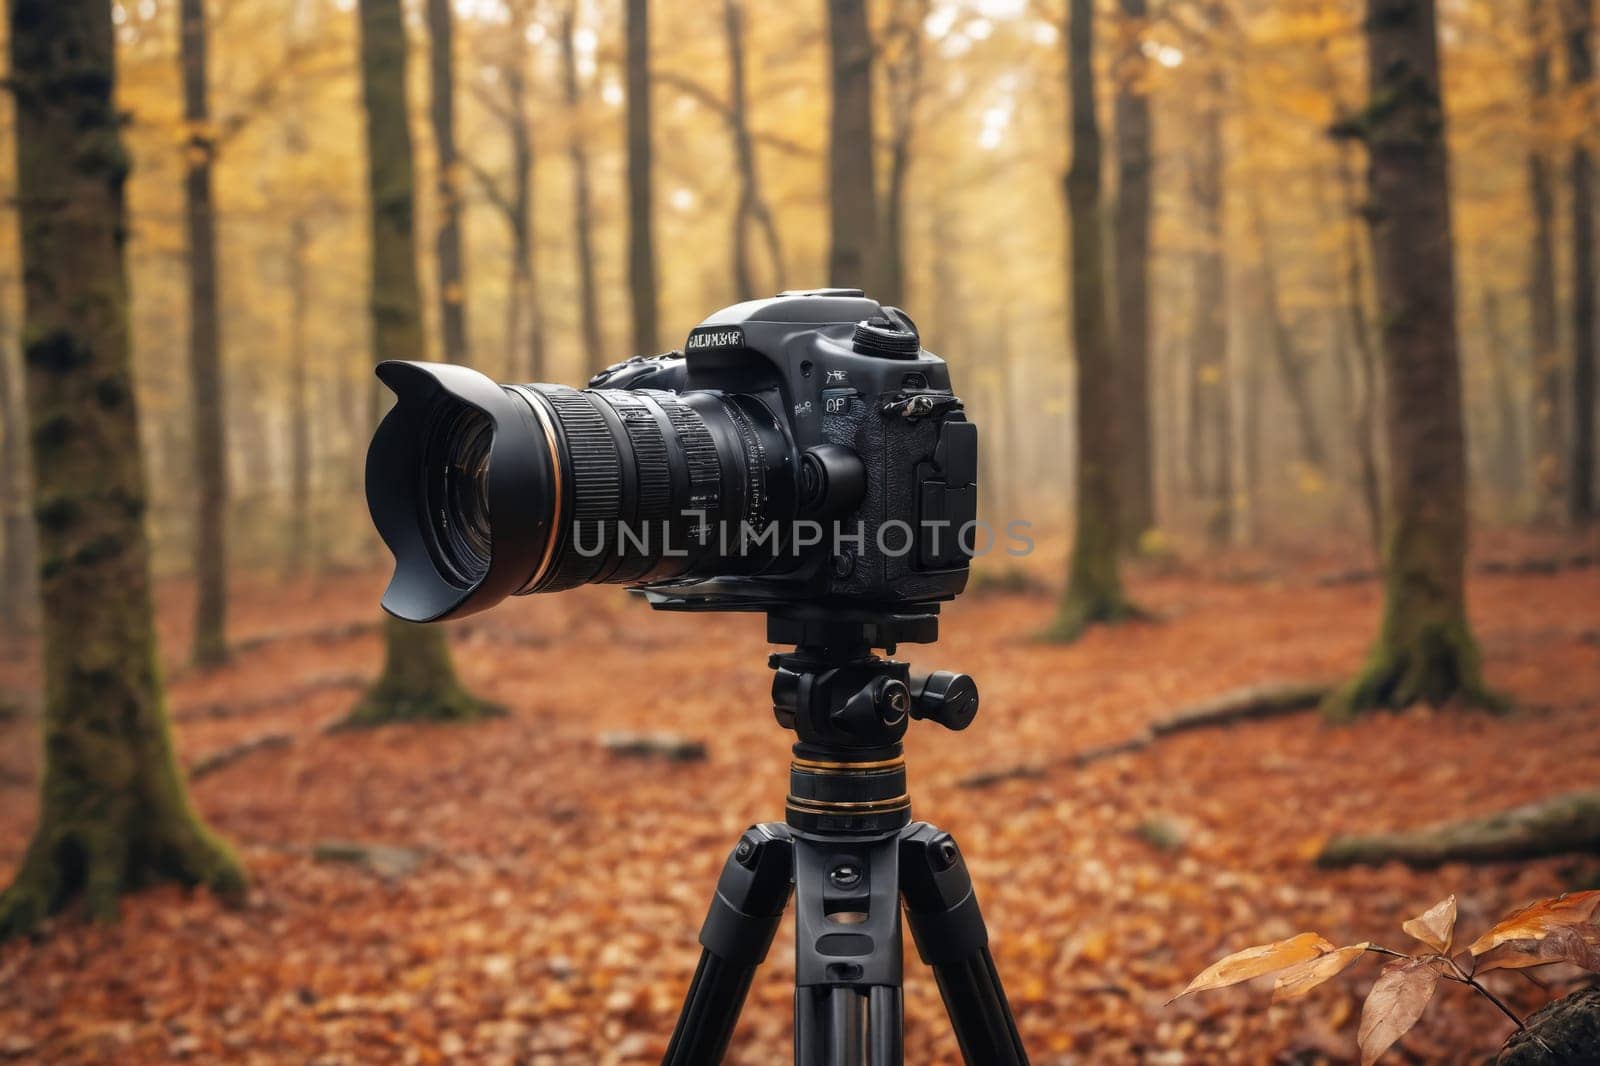 Nestled in a secluded forest, a camera on a tripod waits to capture the beauty of autumn.